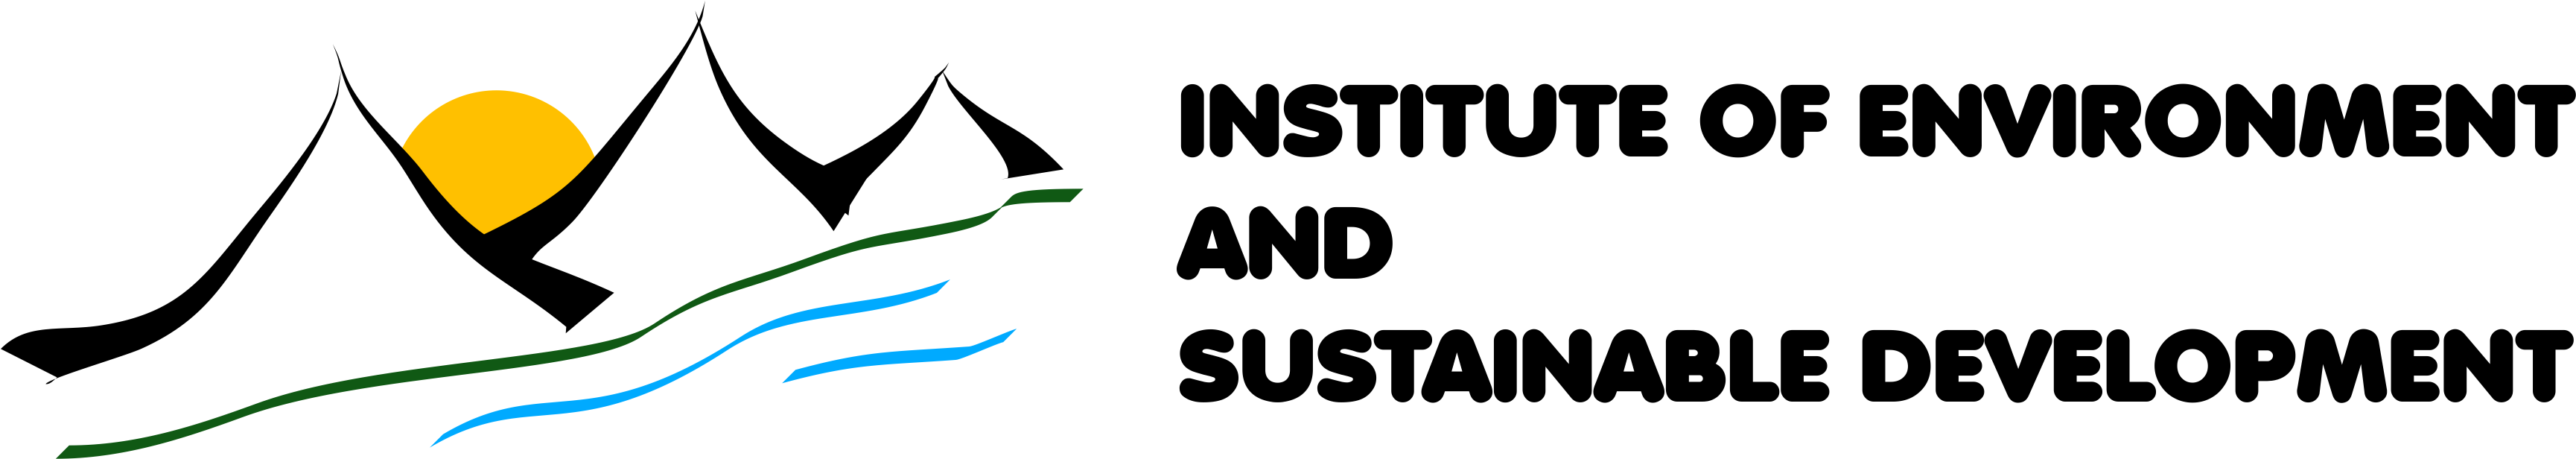 Institute of Environment and Sustainable Development